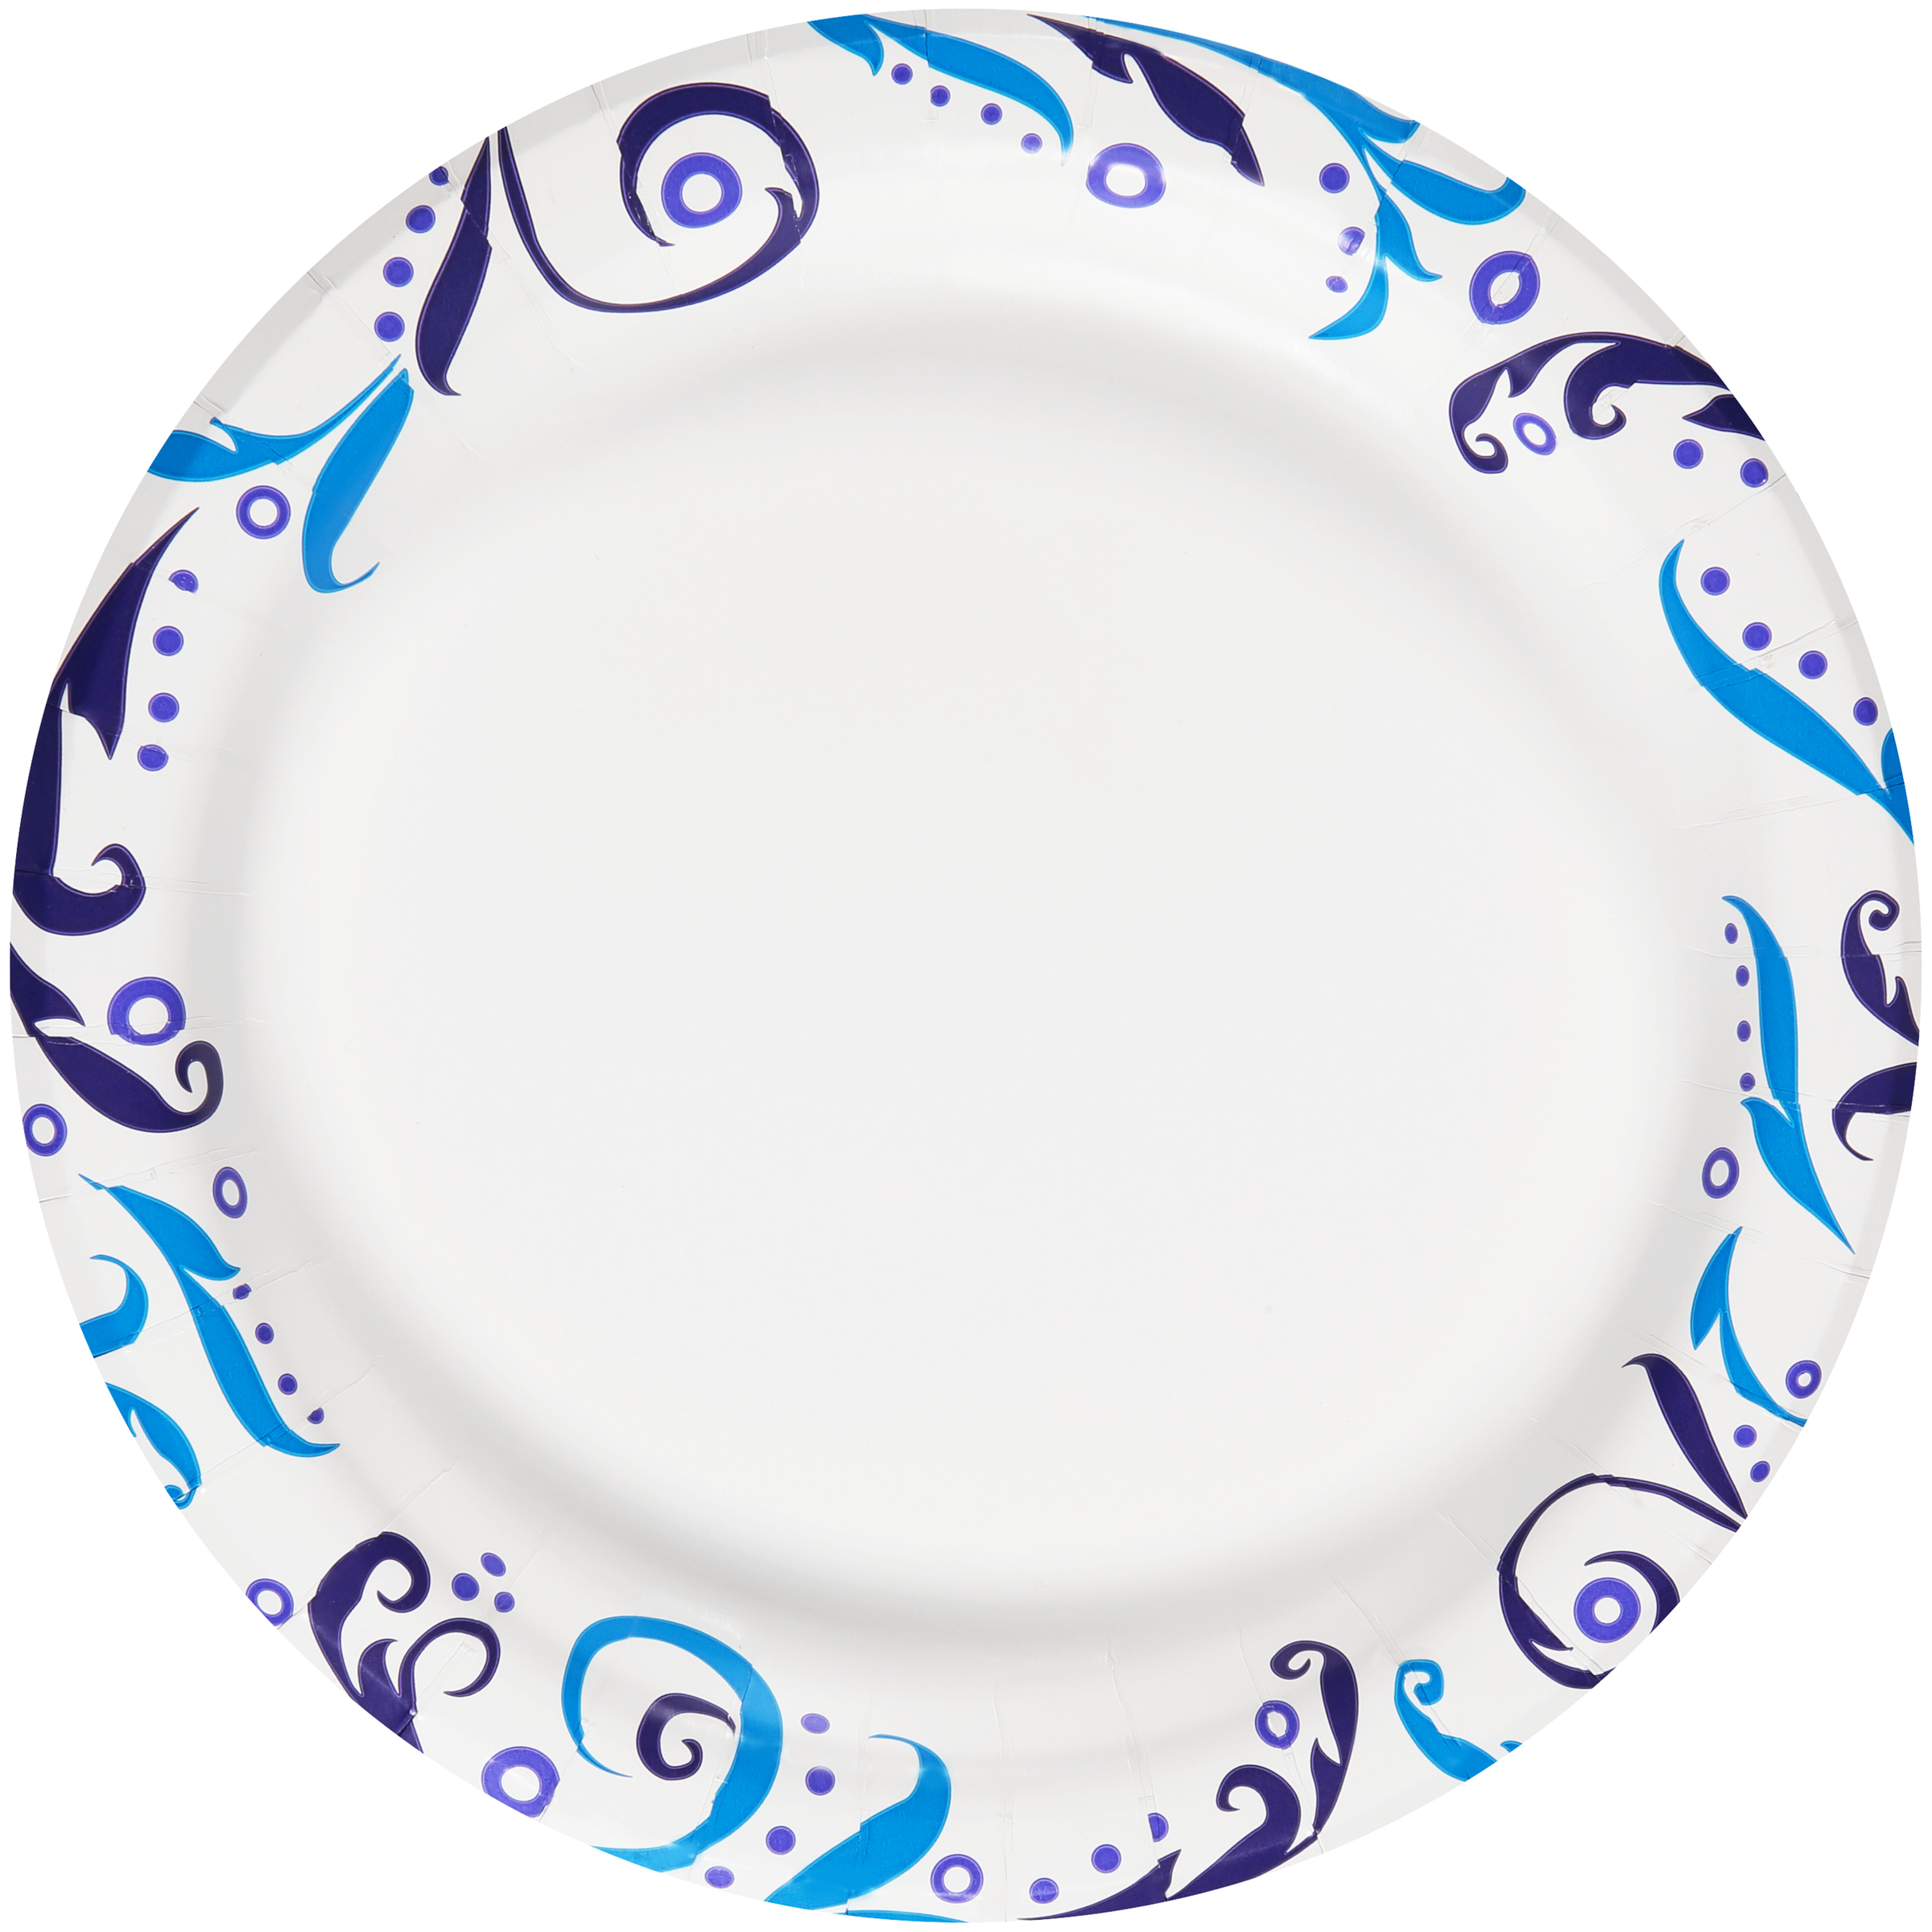 Great Value Everyday Strong, Soak Proof, Microwave Safe, Disposable Paper Lunch Plates, 9 in, 100 Plates, Patterned - image 2 of 9